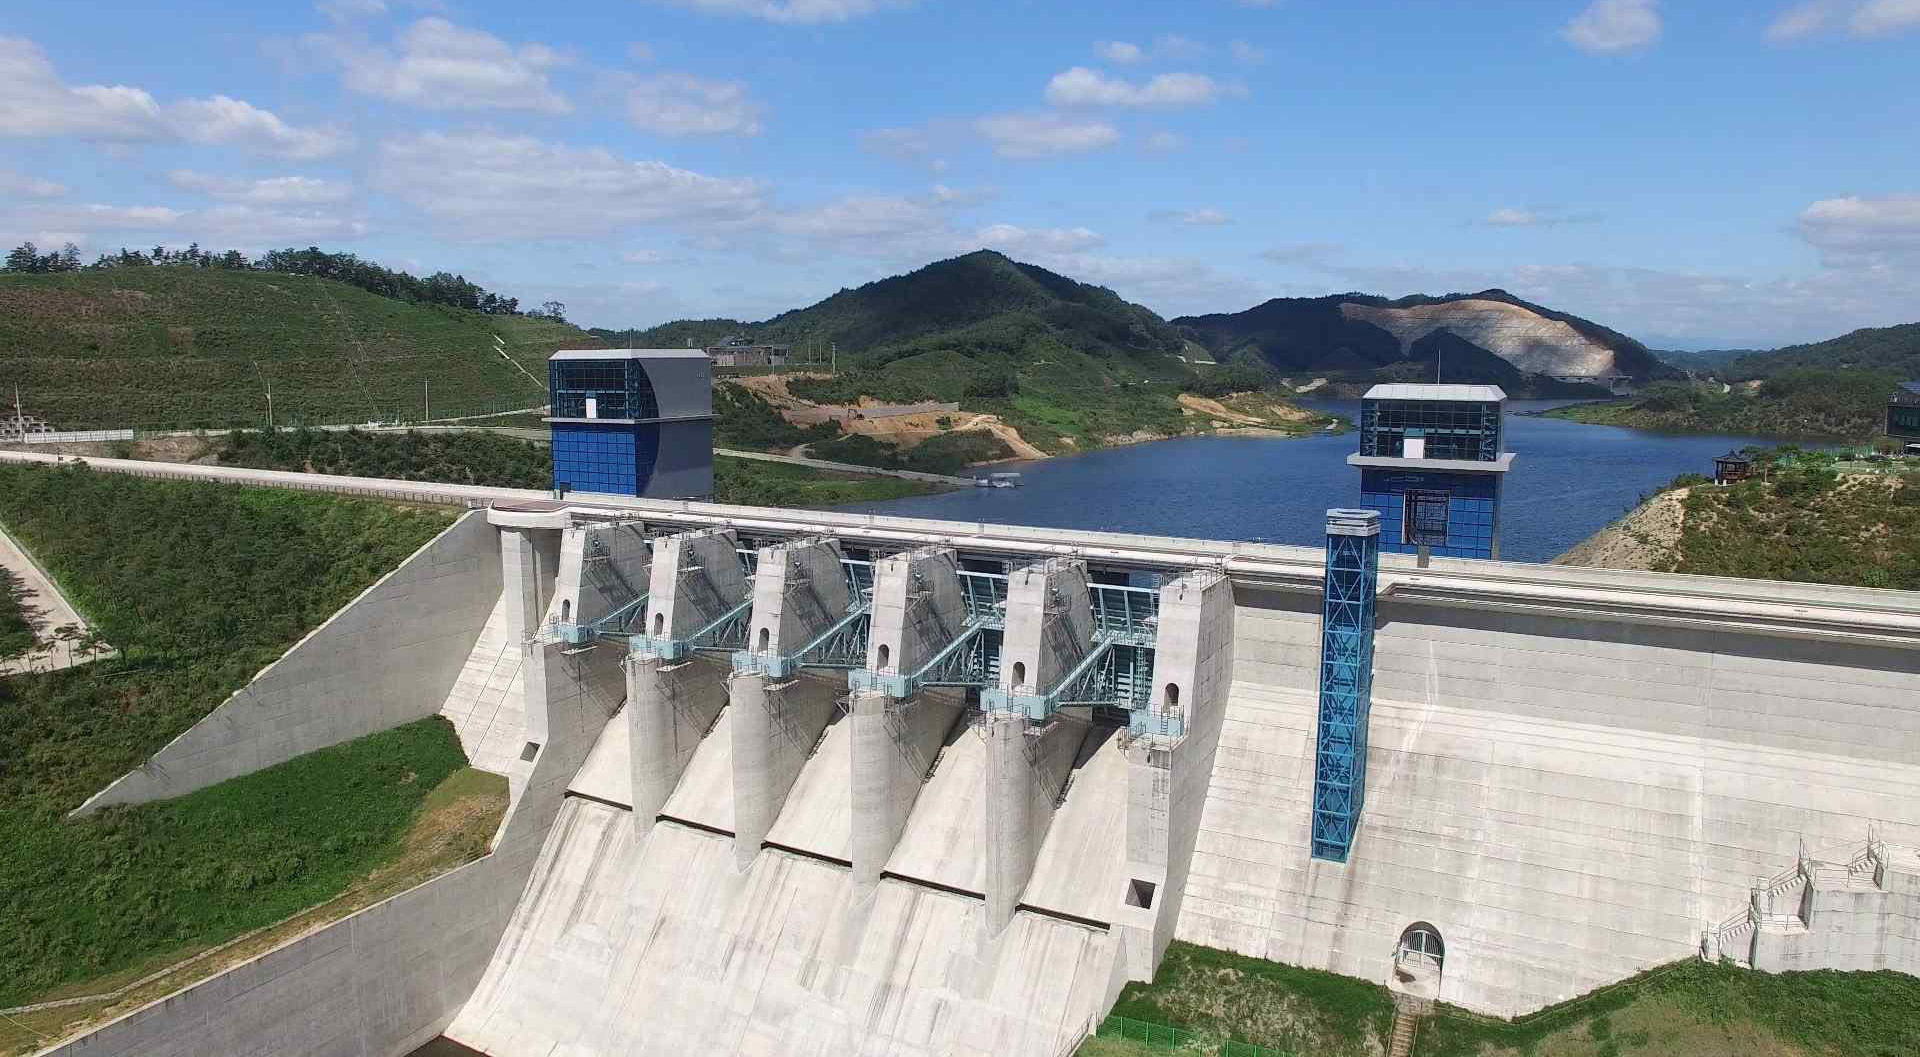 The Yeongju Dam in Korea serves multiple purposes at once: It generates electricity, controls floods, and provides a steady water supply.